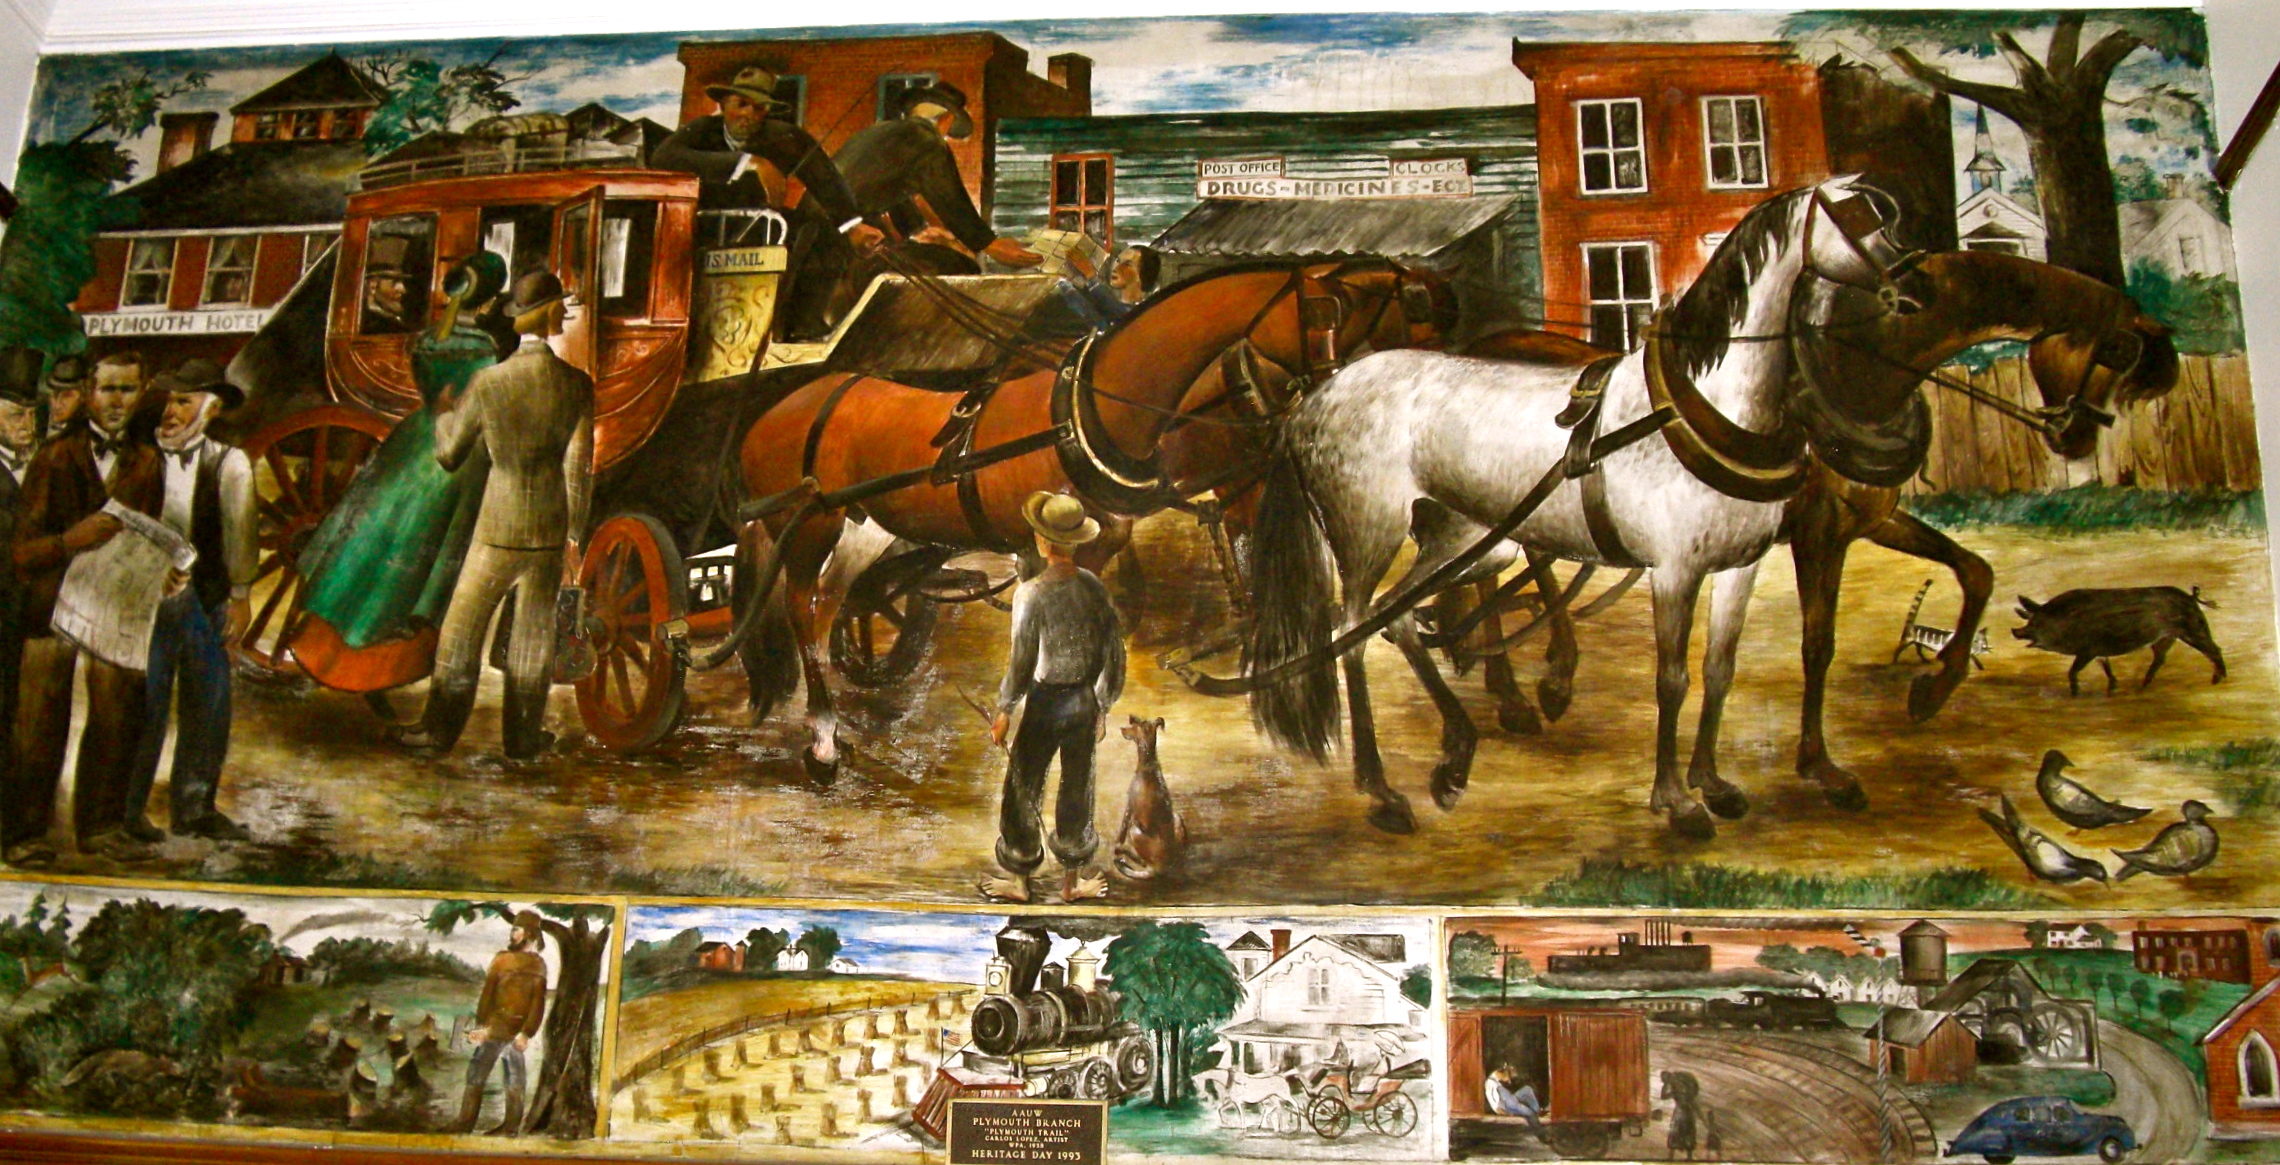 Plymouth Post Office Mural